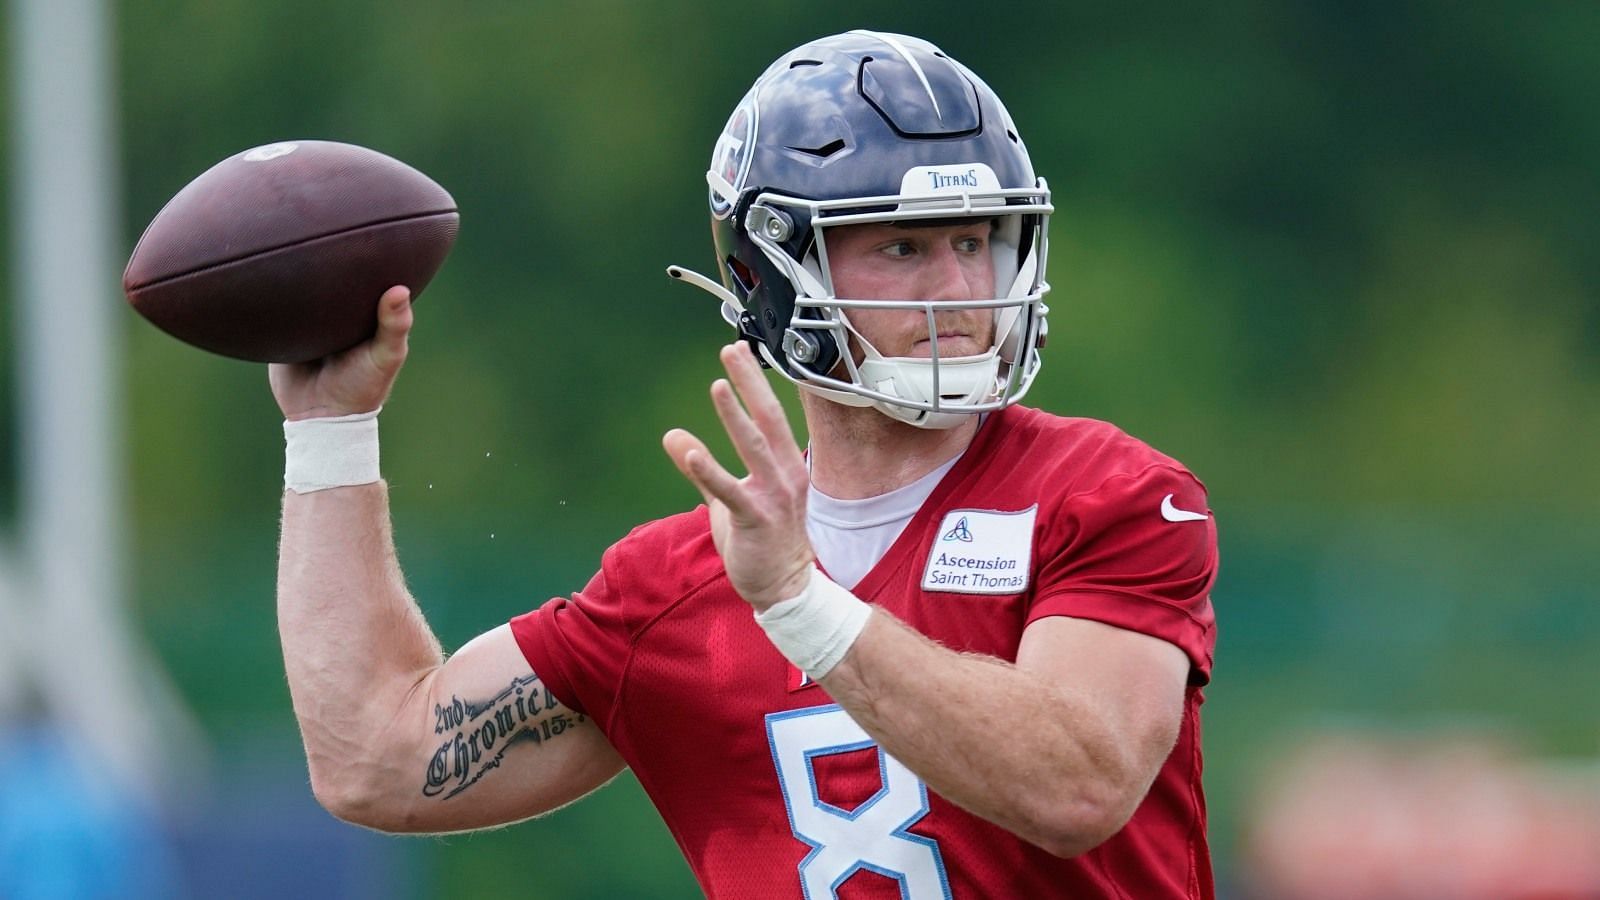 Will Levis' salary How much is Titans QB’s contract worth?